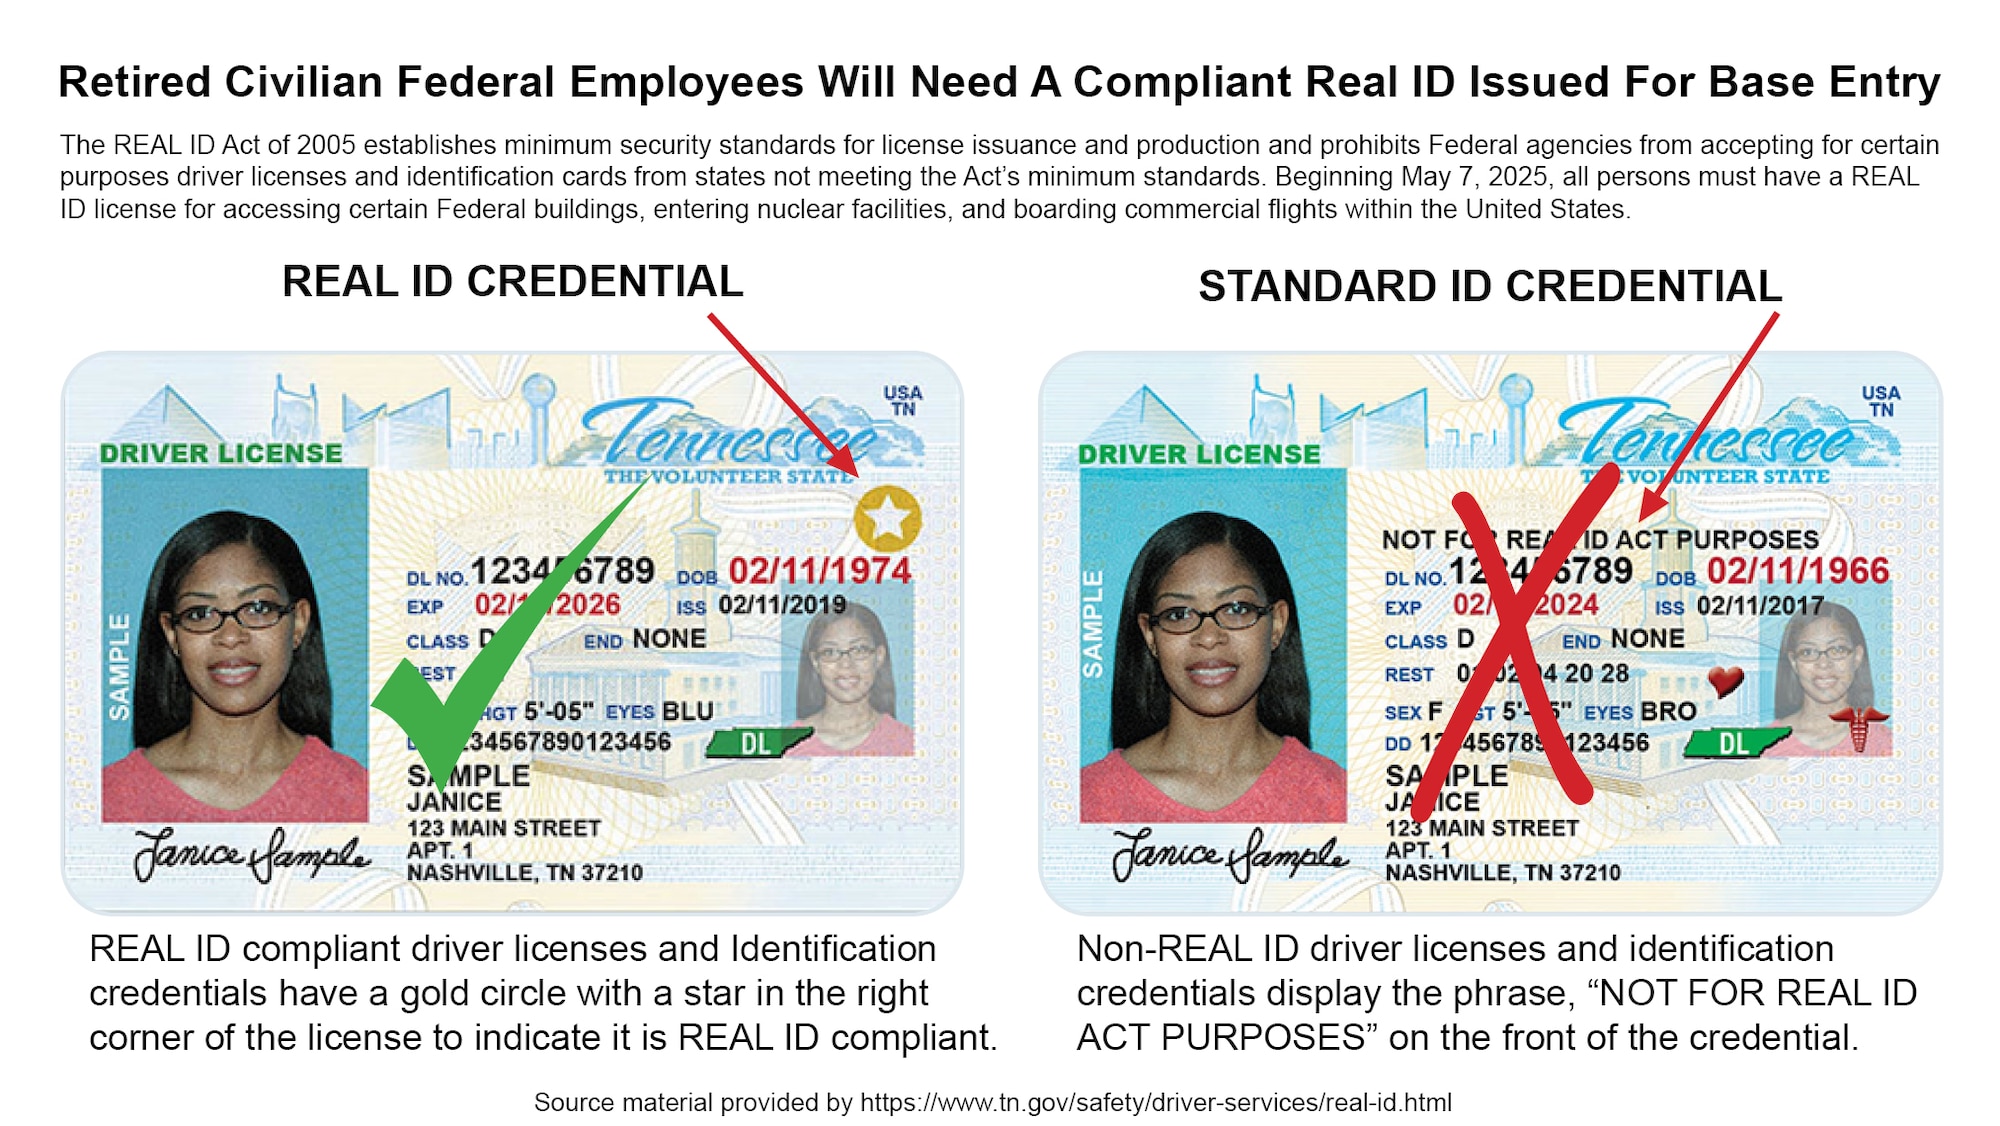 Department of Defense civilian retiree ID cards will no longer be valid effective Aug. 31, 2023. The DOD issued a memorandum in February 2023 announcing the issuance of new civilian retiree ID cards would be terminated immediately and previously issued cards would remain valid through the end of August. DOD civilian retirees can take steps to continue to access Arnold Air Force Base, Tenn. The preferred method is to obtain a REAL ID, such as the one pictured at left in the above image, and register with the Arnold AFB Visitor Control Center. REAL ID compliant driver’s licenses and identification credentials are marked with a gold circle containing a star in the right corner. (U.S. Air Force graphic by Brooke Brumley)